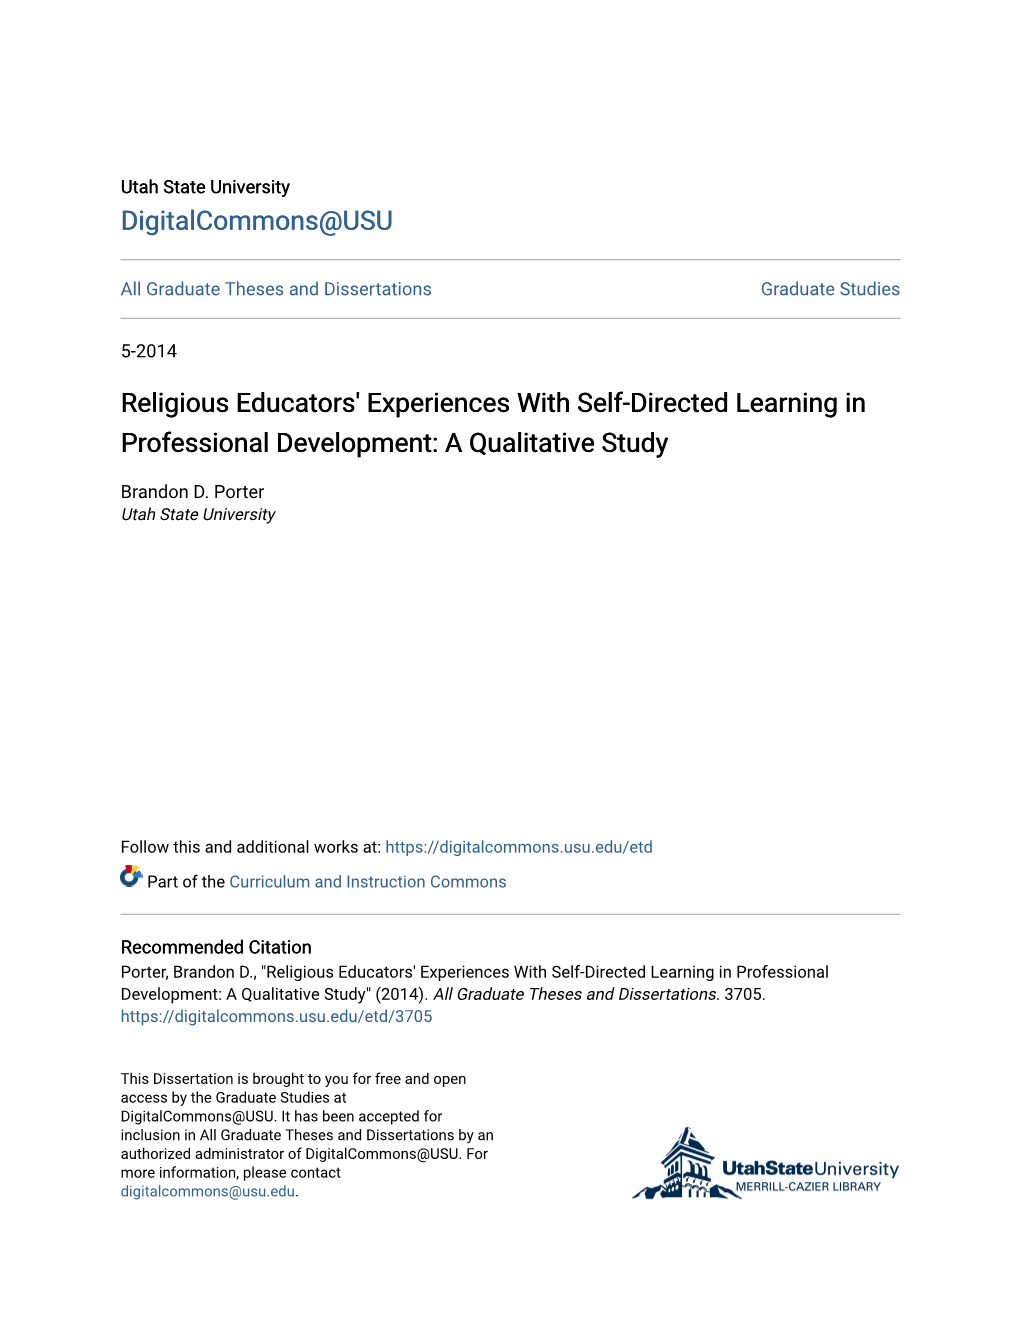 Religious Educators' Experiences with Self-Directed Learning in Professional Development: a Qualitative Study